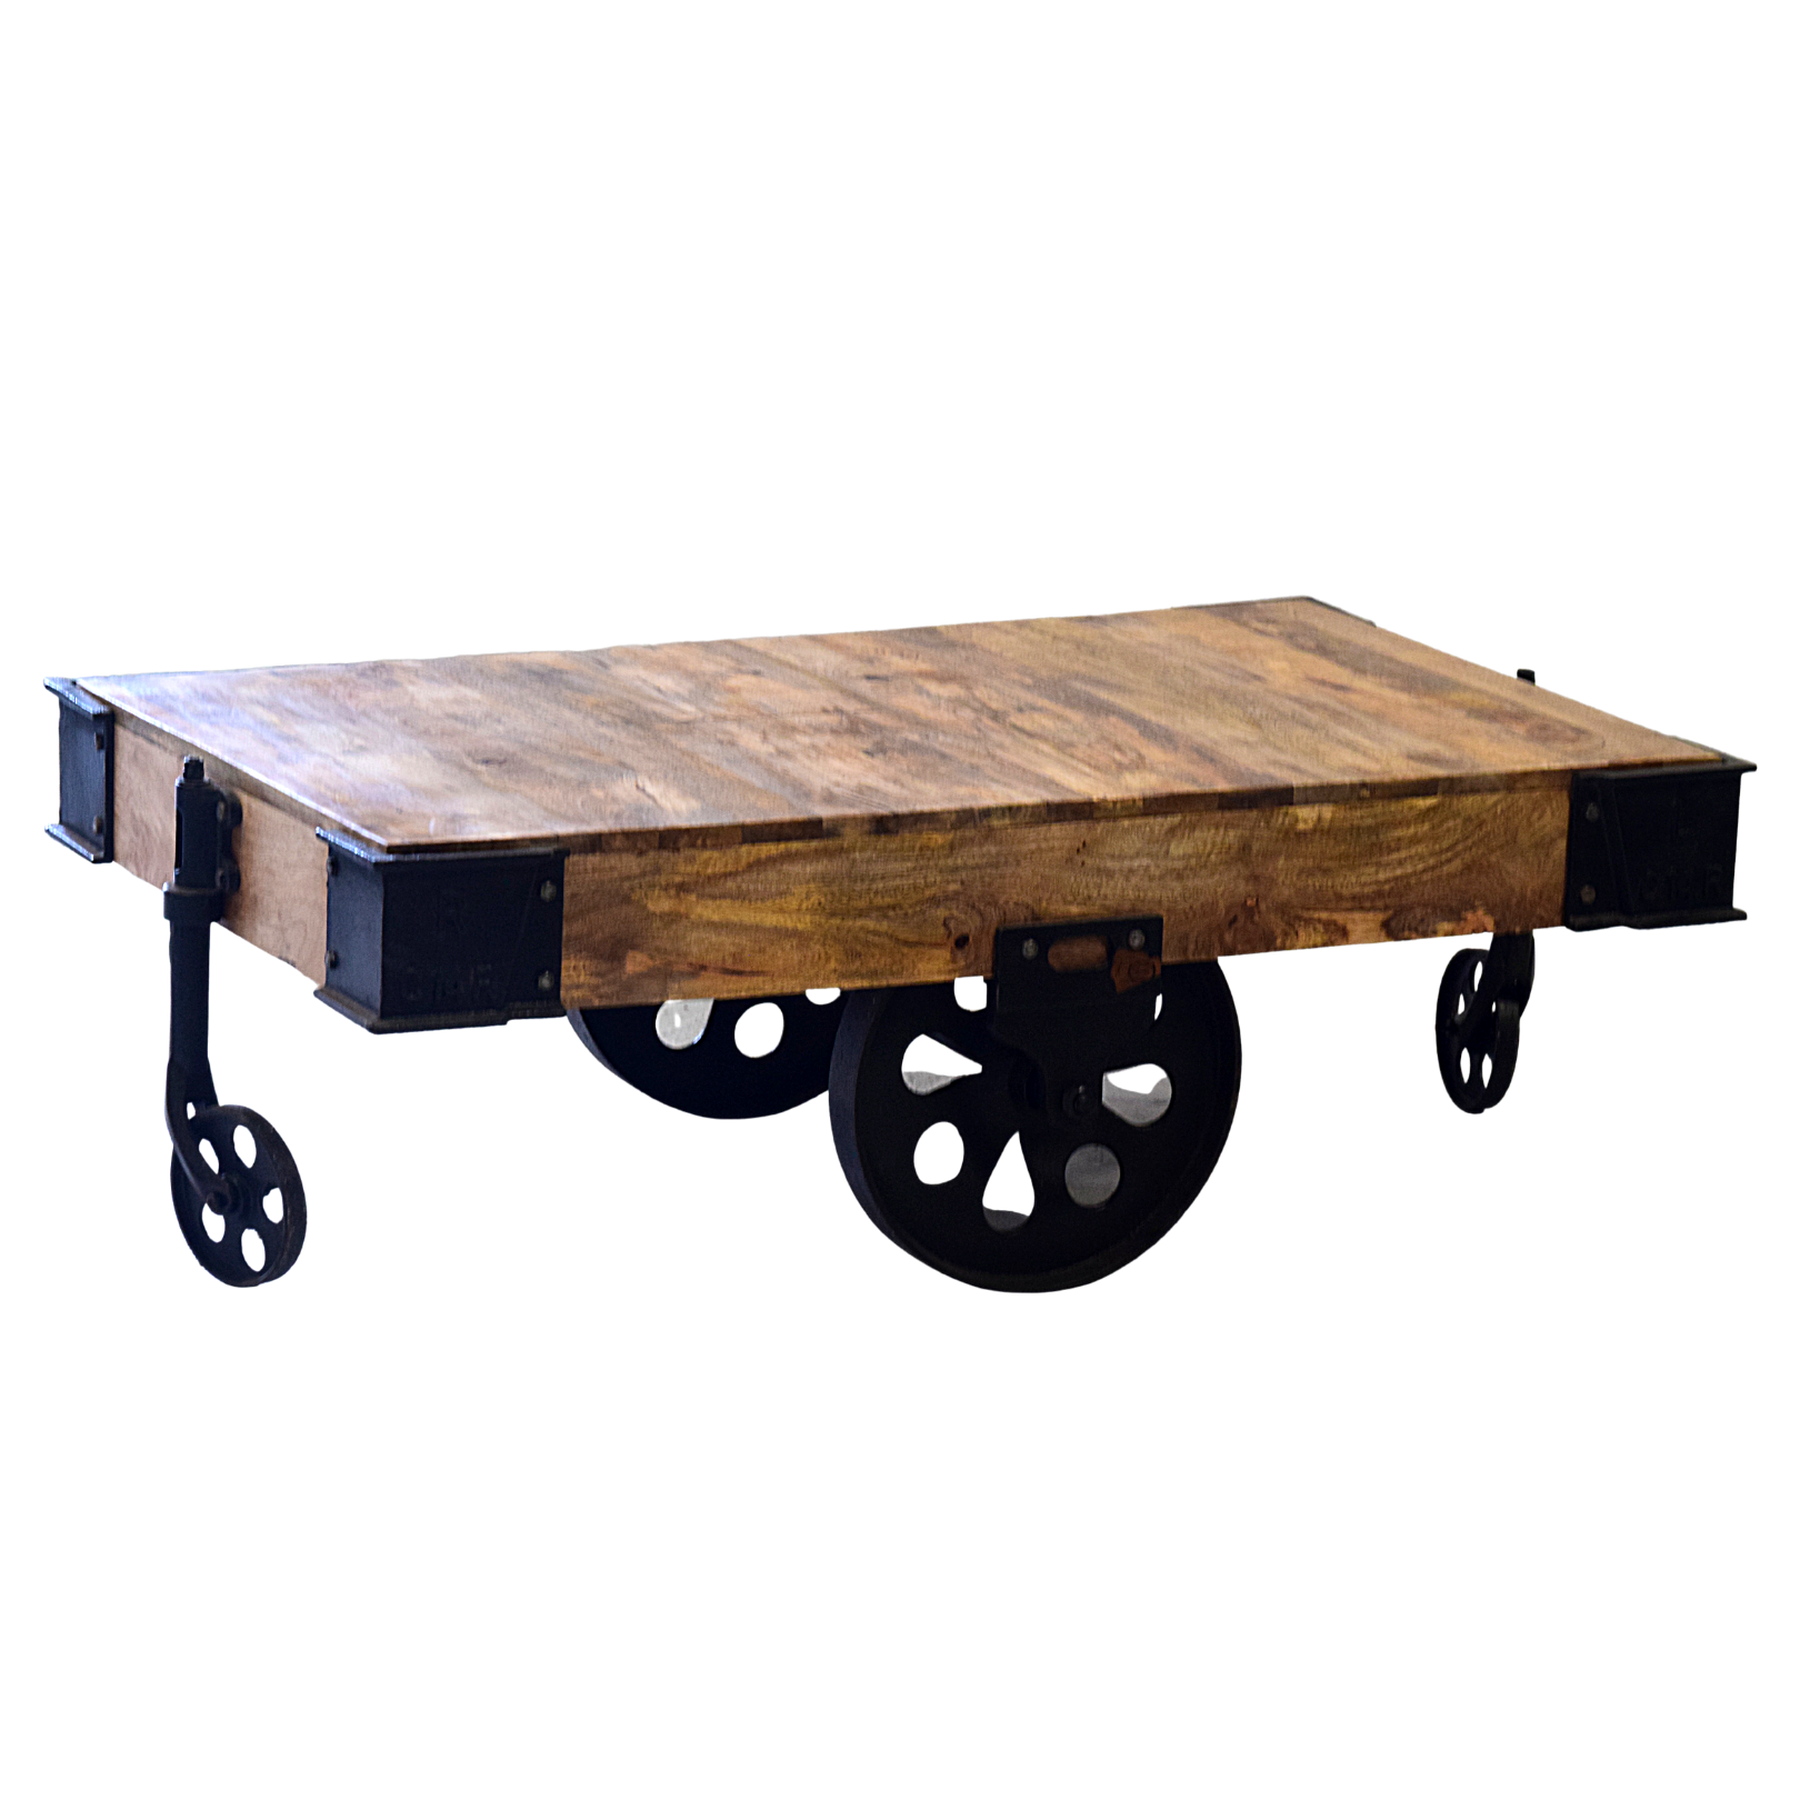 Iron Mango Wood Industrial Centre Wagon Table | 42x28x17 inches